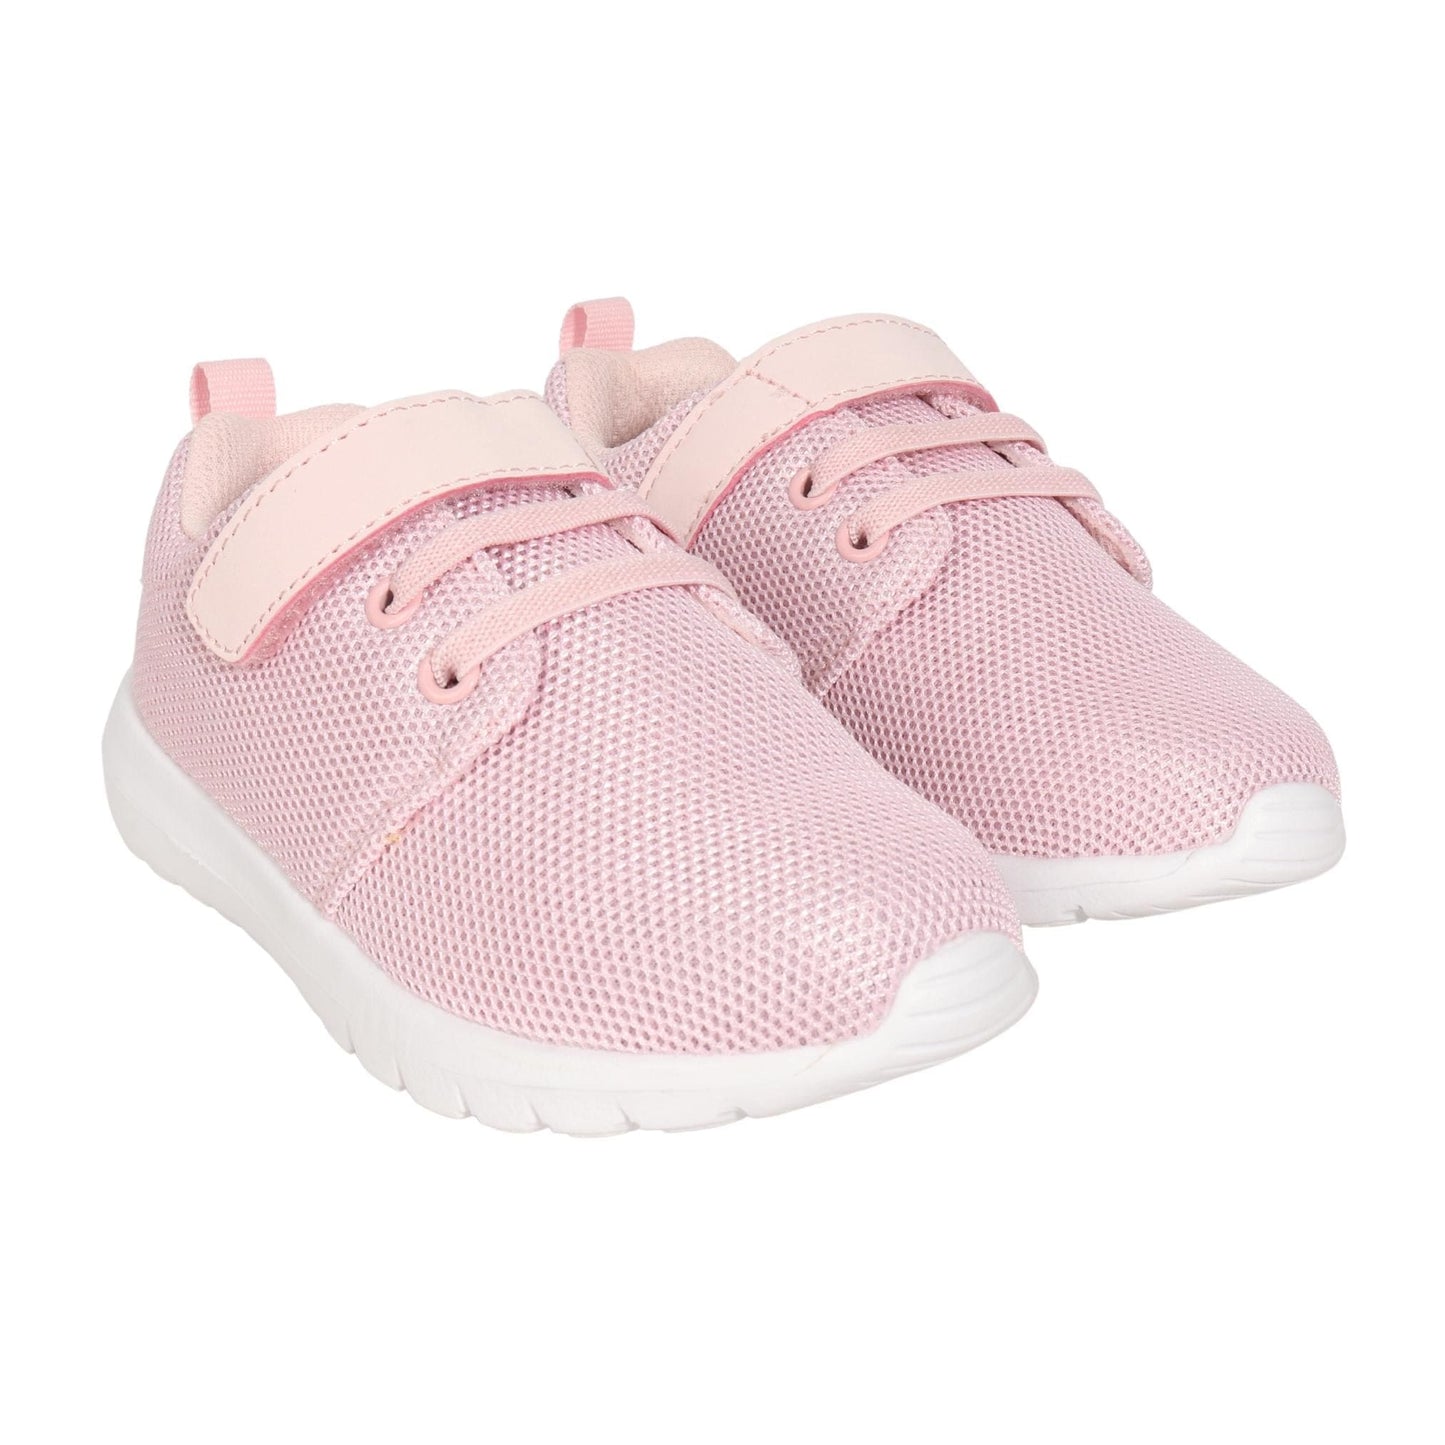 SKYWHEEL Baby Shoes 25 / Pink SKYWHEEL - Baby - Lightweight Breathable Running Shoes